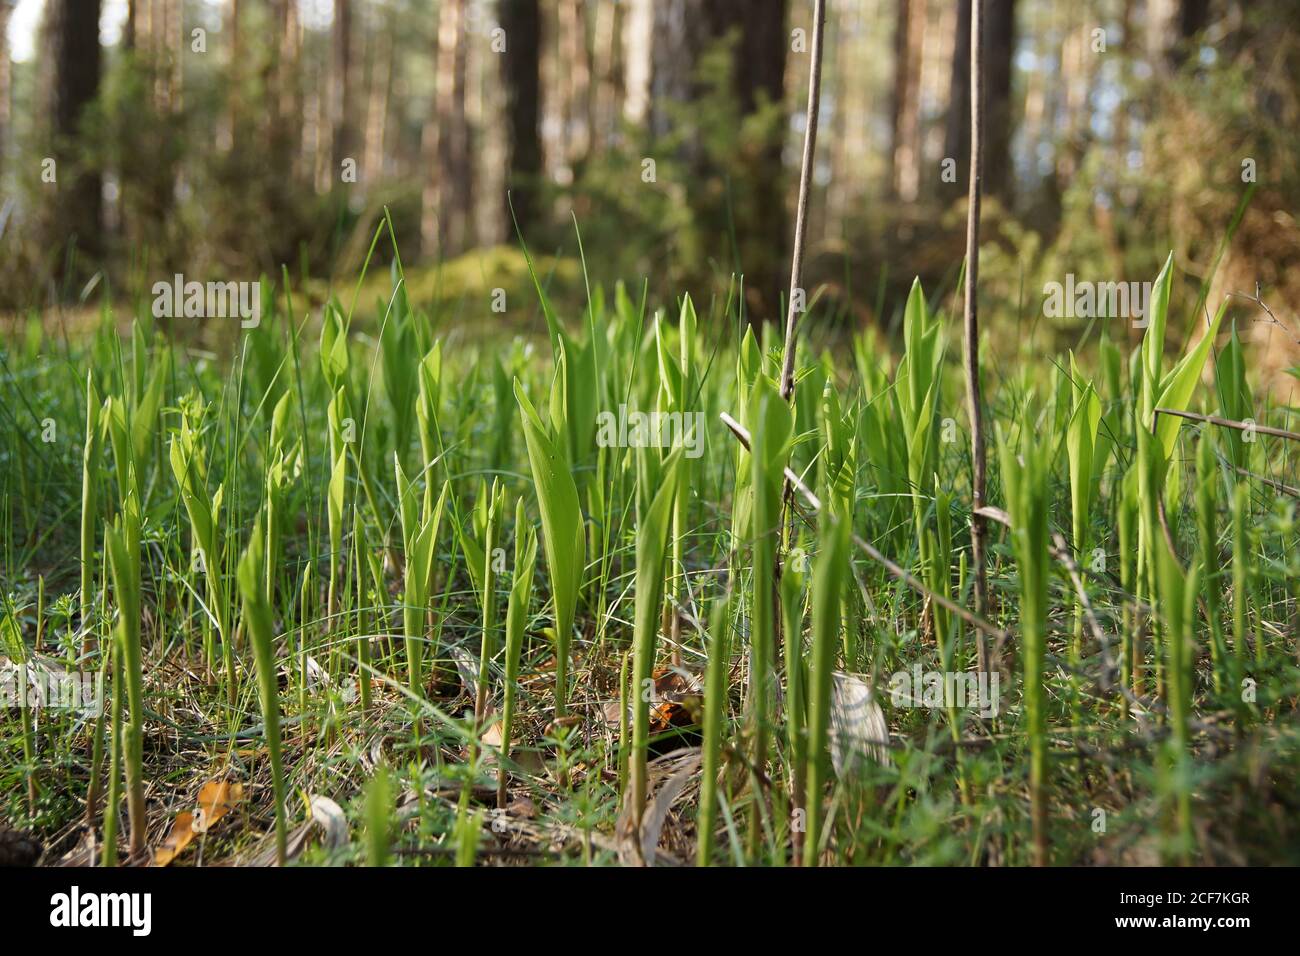 April in the Biebrza Valley, landscape on the forest floor, young lilies of the valley against the background of trees, bokeh Stock Photo